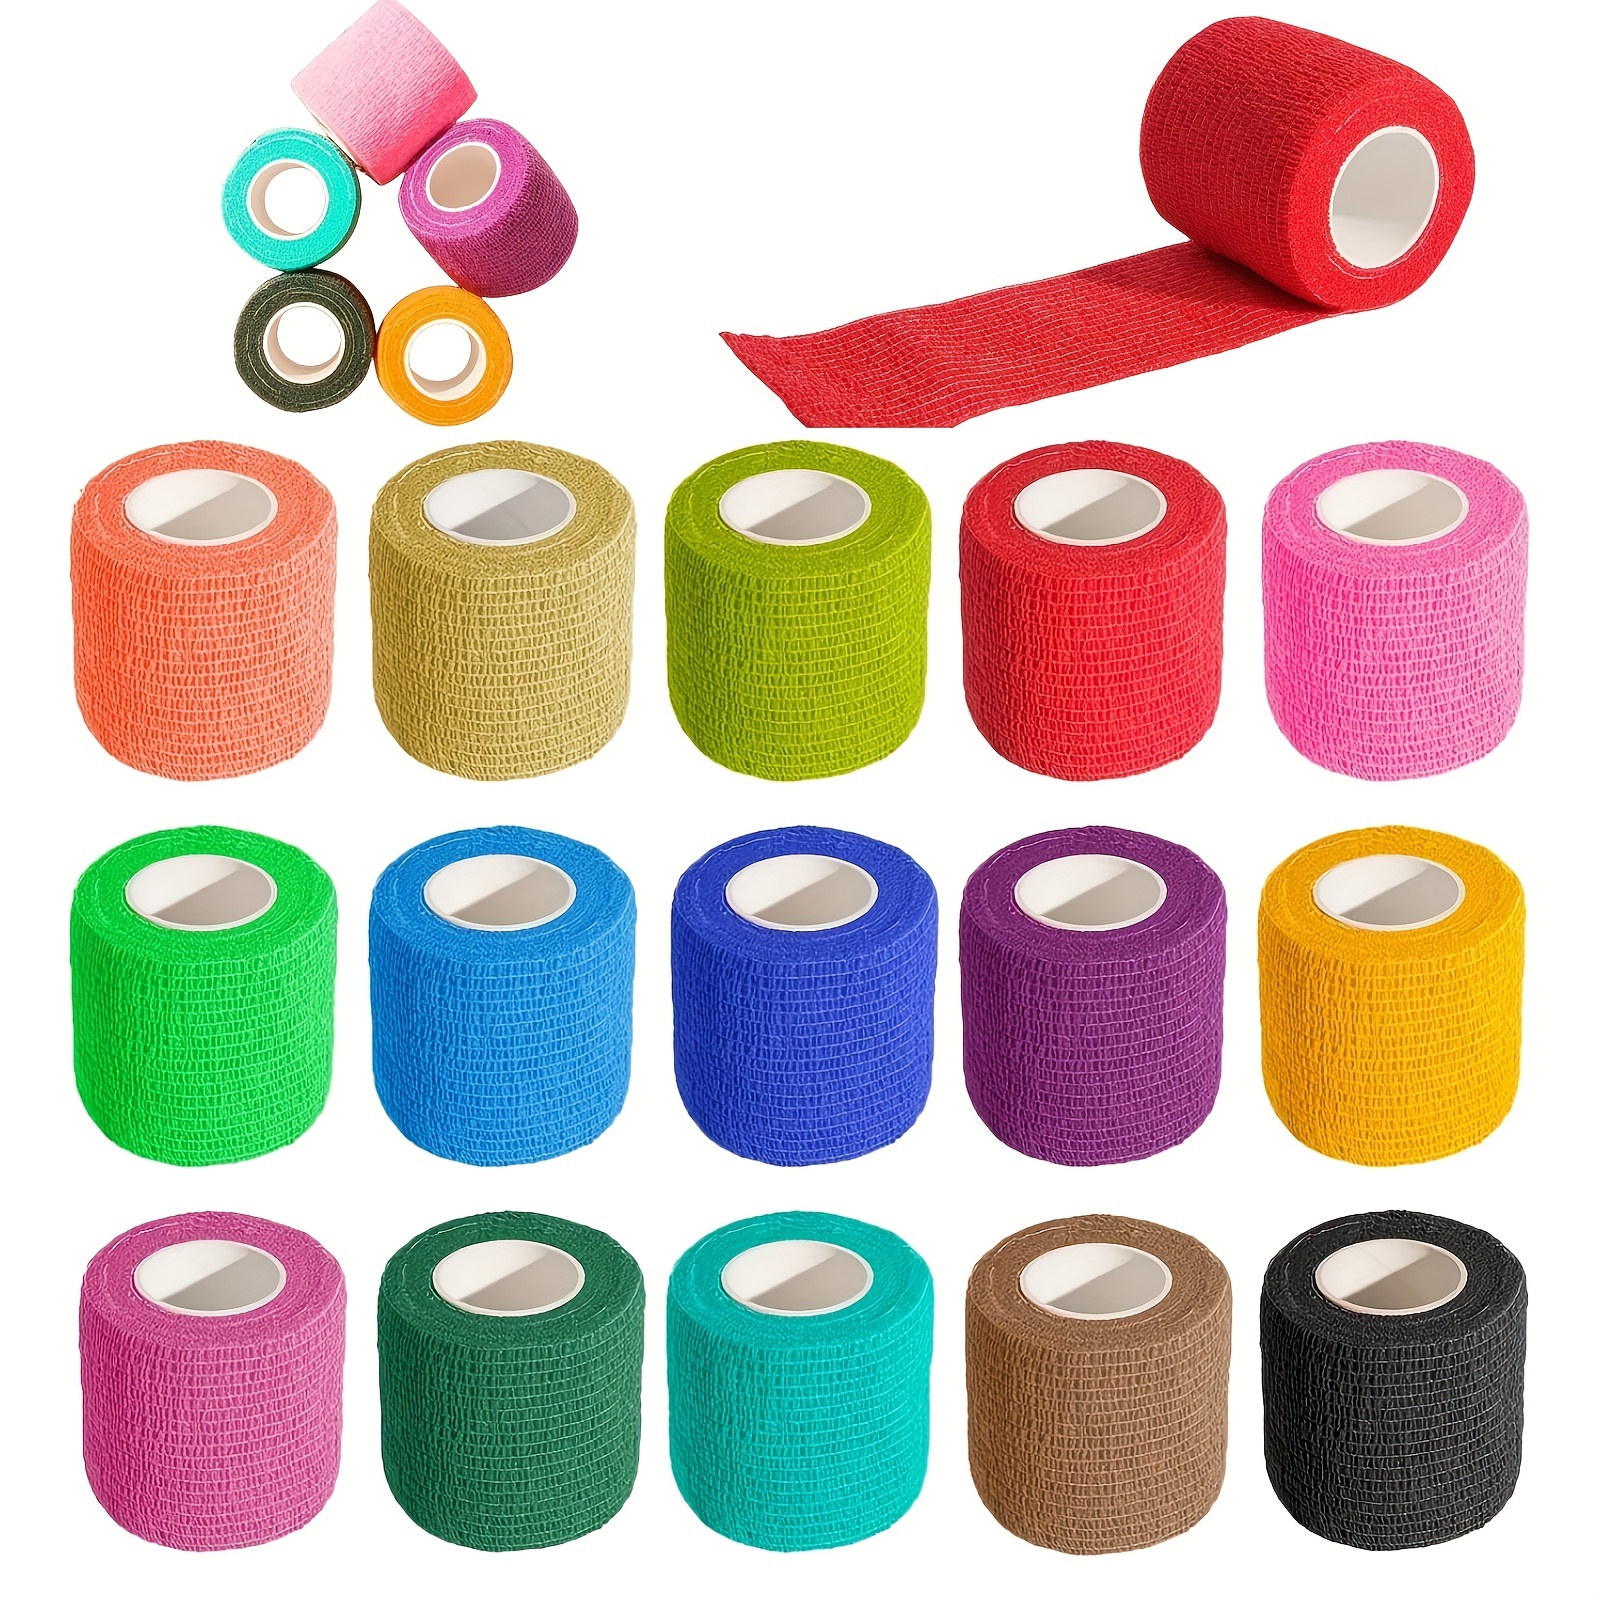 12 Rolls Colorful Self Adhesive Bandage Wrap 4 Inch Wide x 5 Yards -  Cohesive Vet Tape for First Aid, Sports, Tattoo (12 Colors)